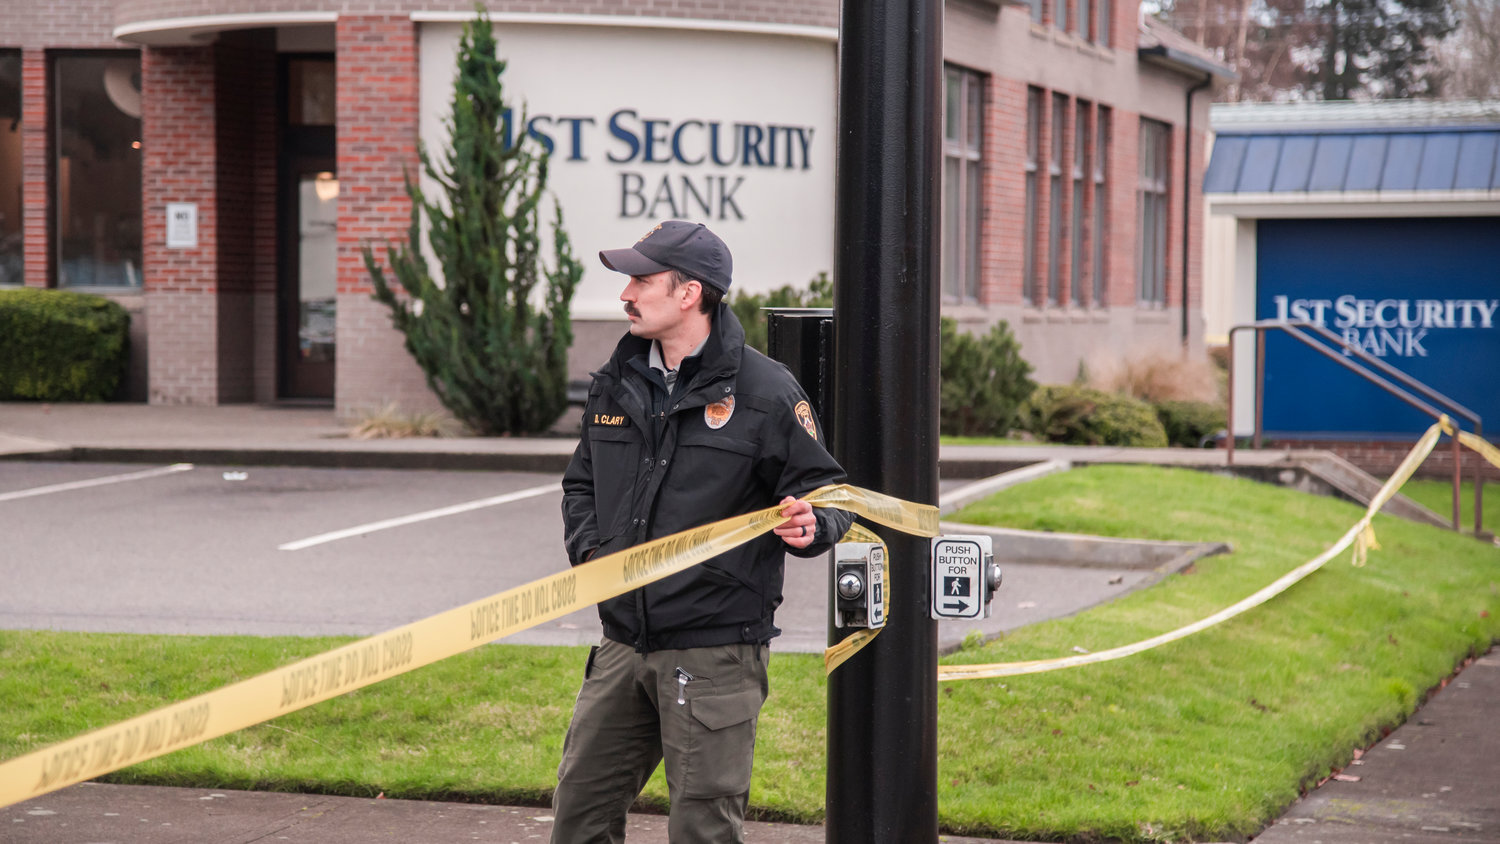 Detective Sergeant Dave Clary holds police line tape wrapped around 1st Security Bank in Centralia last month.